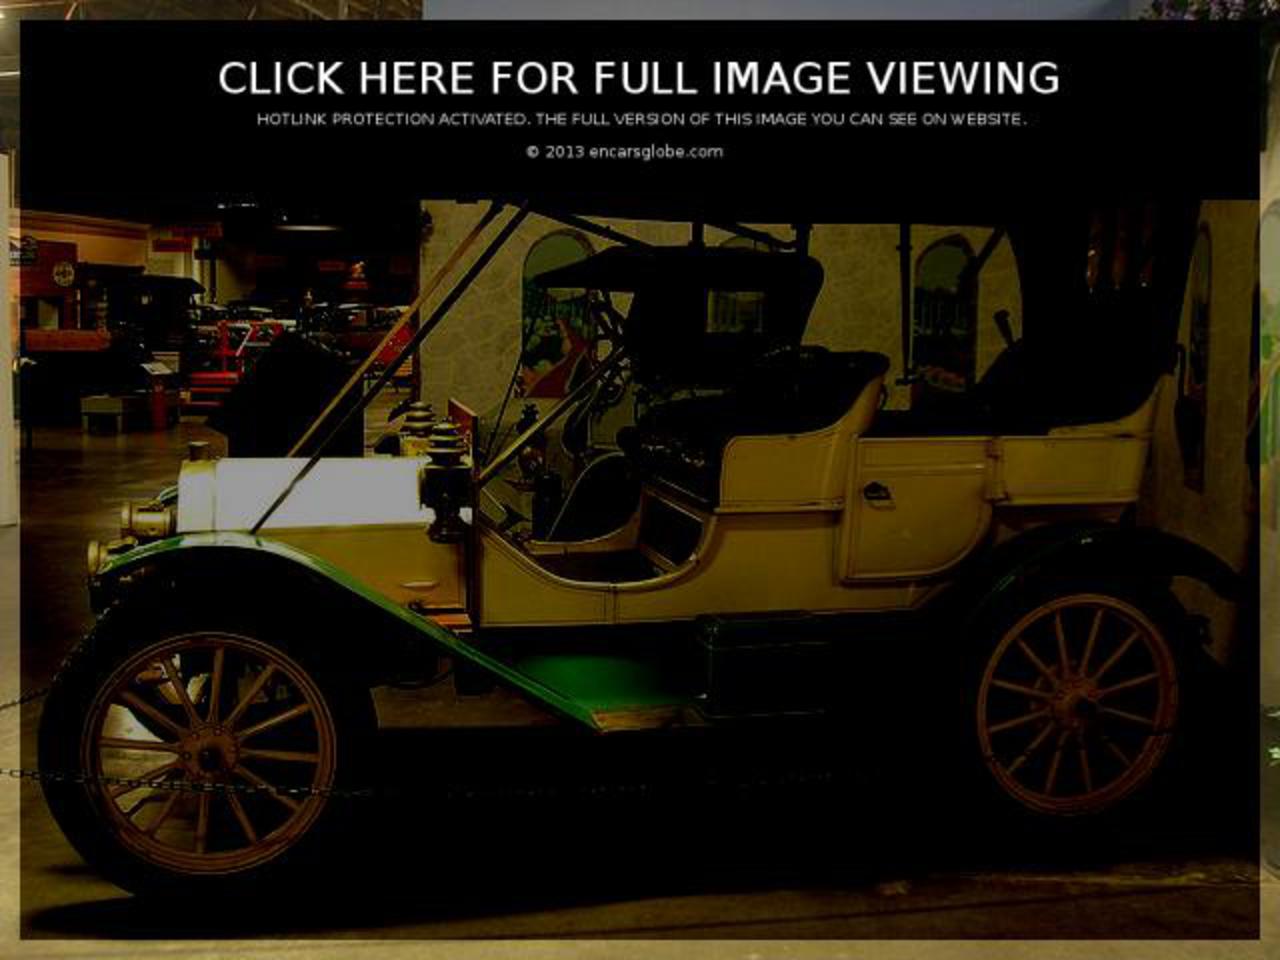 CarterCar Model H Tourin Photo Gallery: Photo #08 out of 10, Image ...